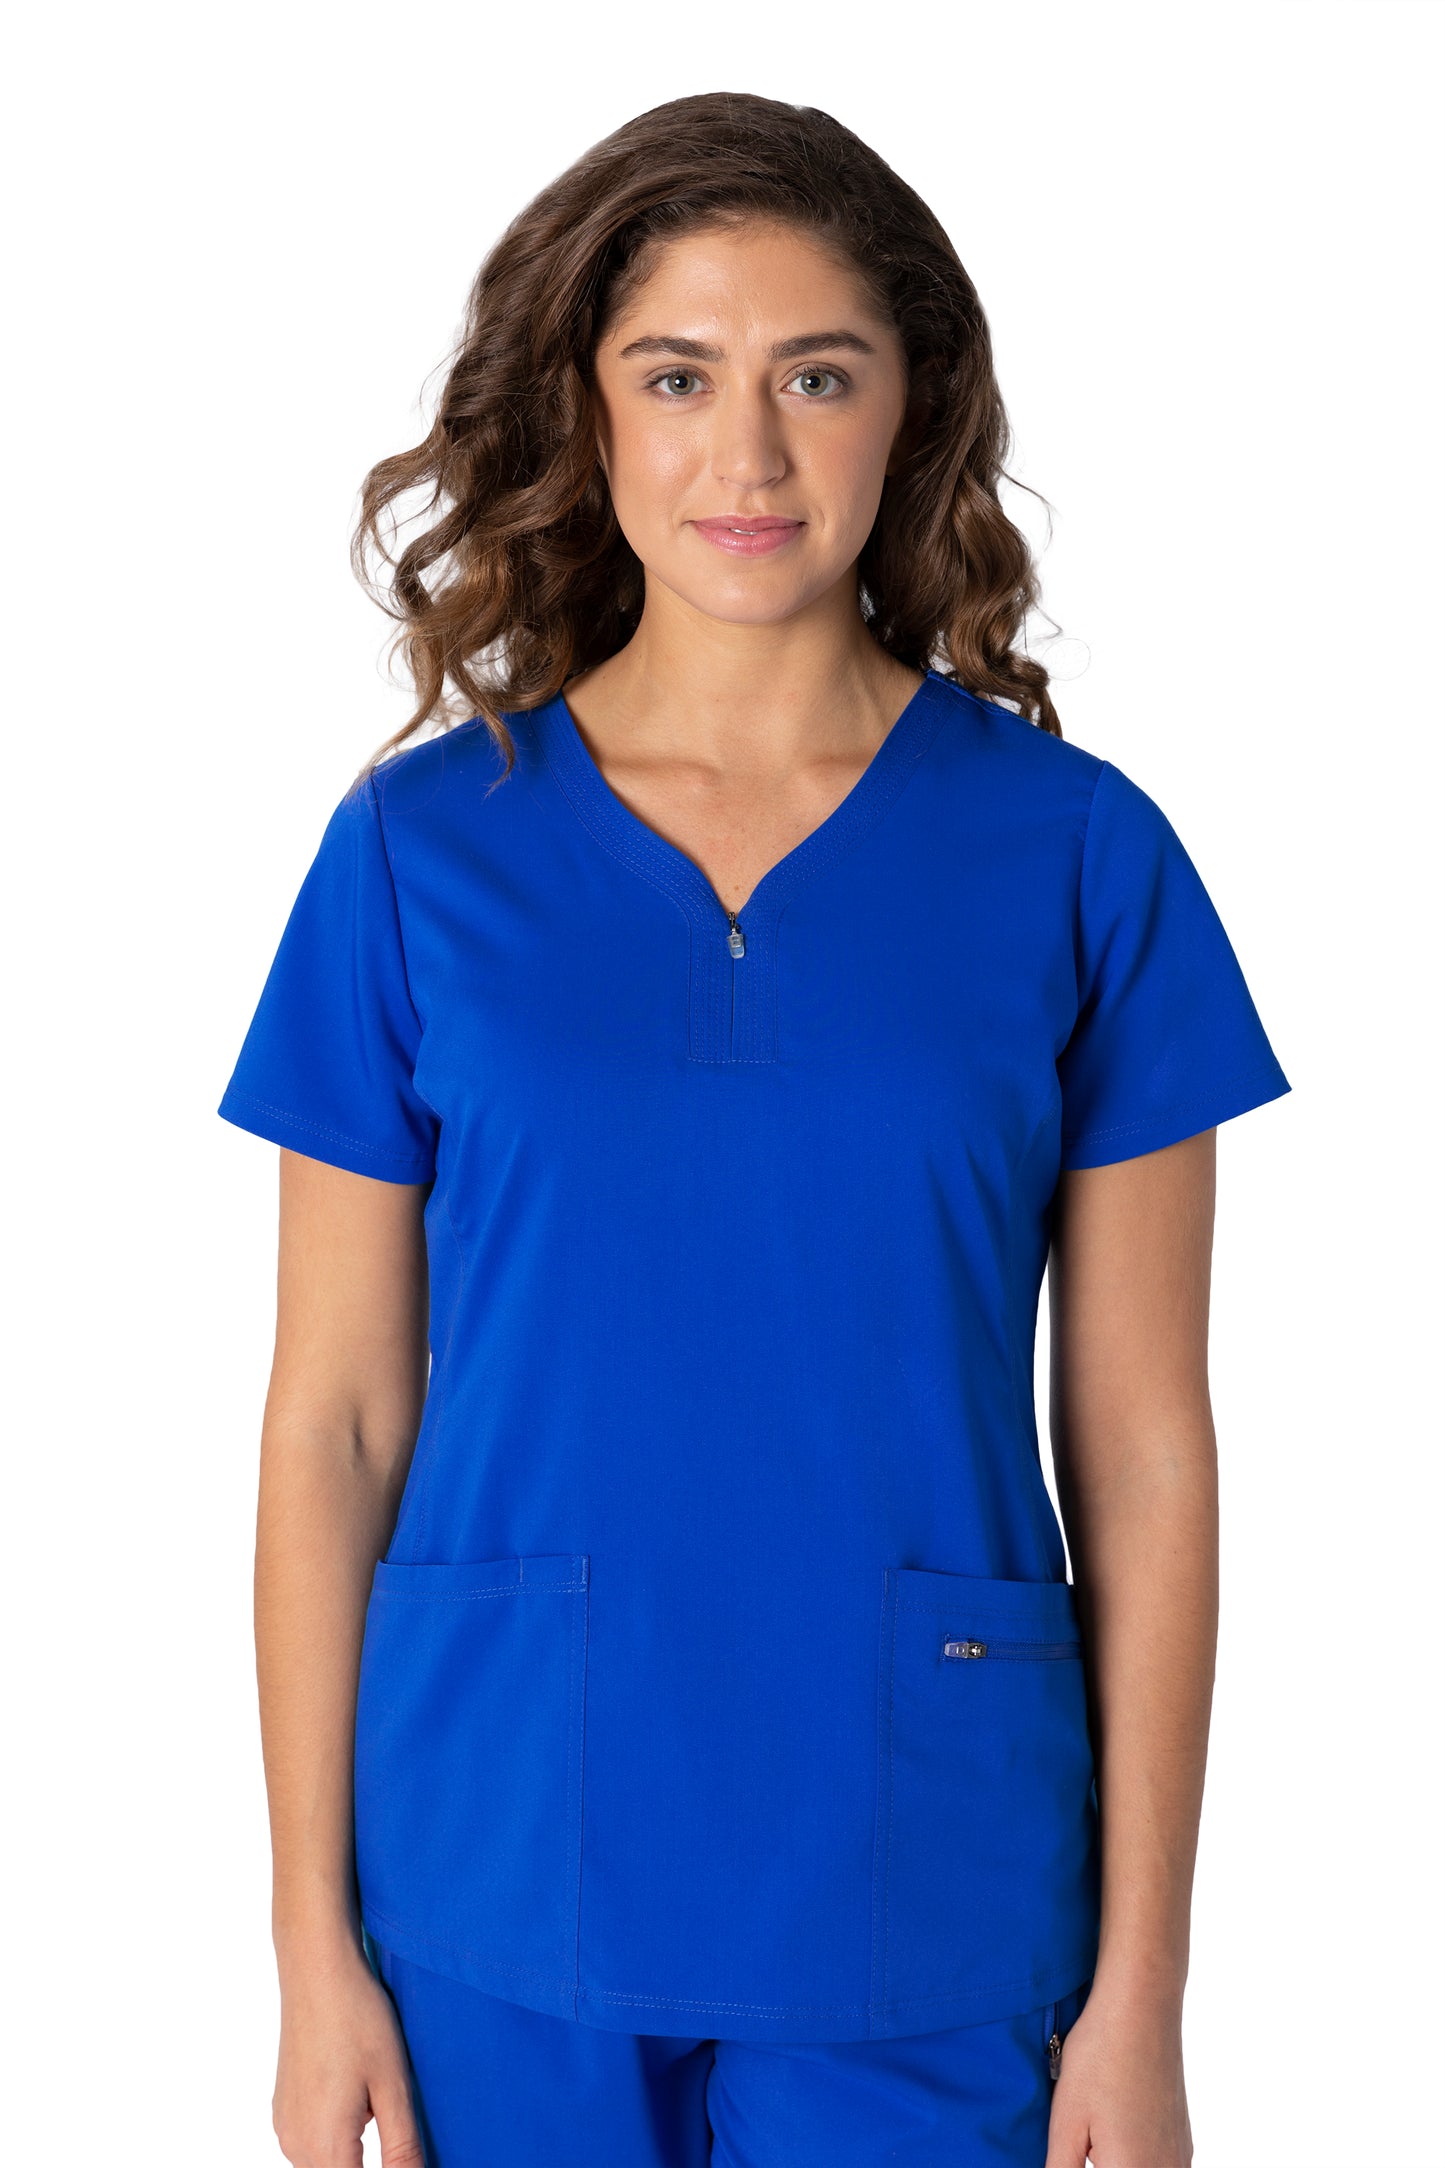 Healing Hands Purple Label Jeni Scrub Top in Galaxy Blue at Parker's Clothing and Shoes.